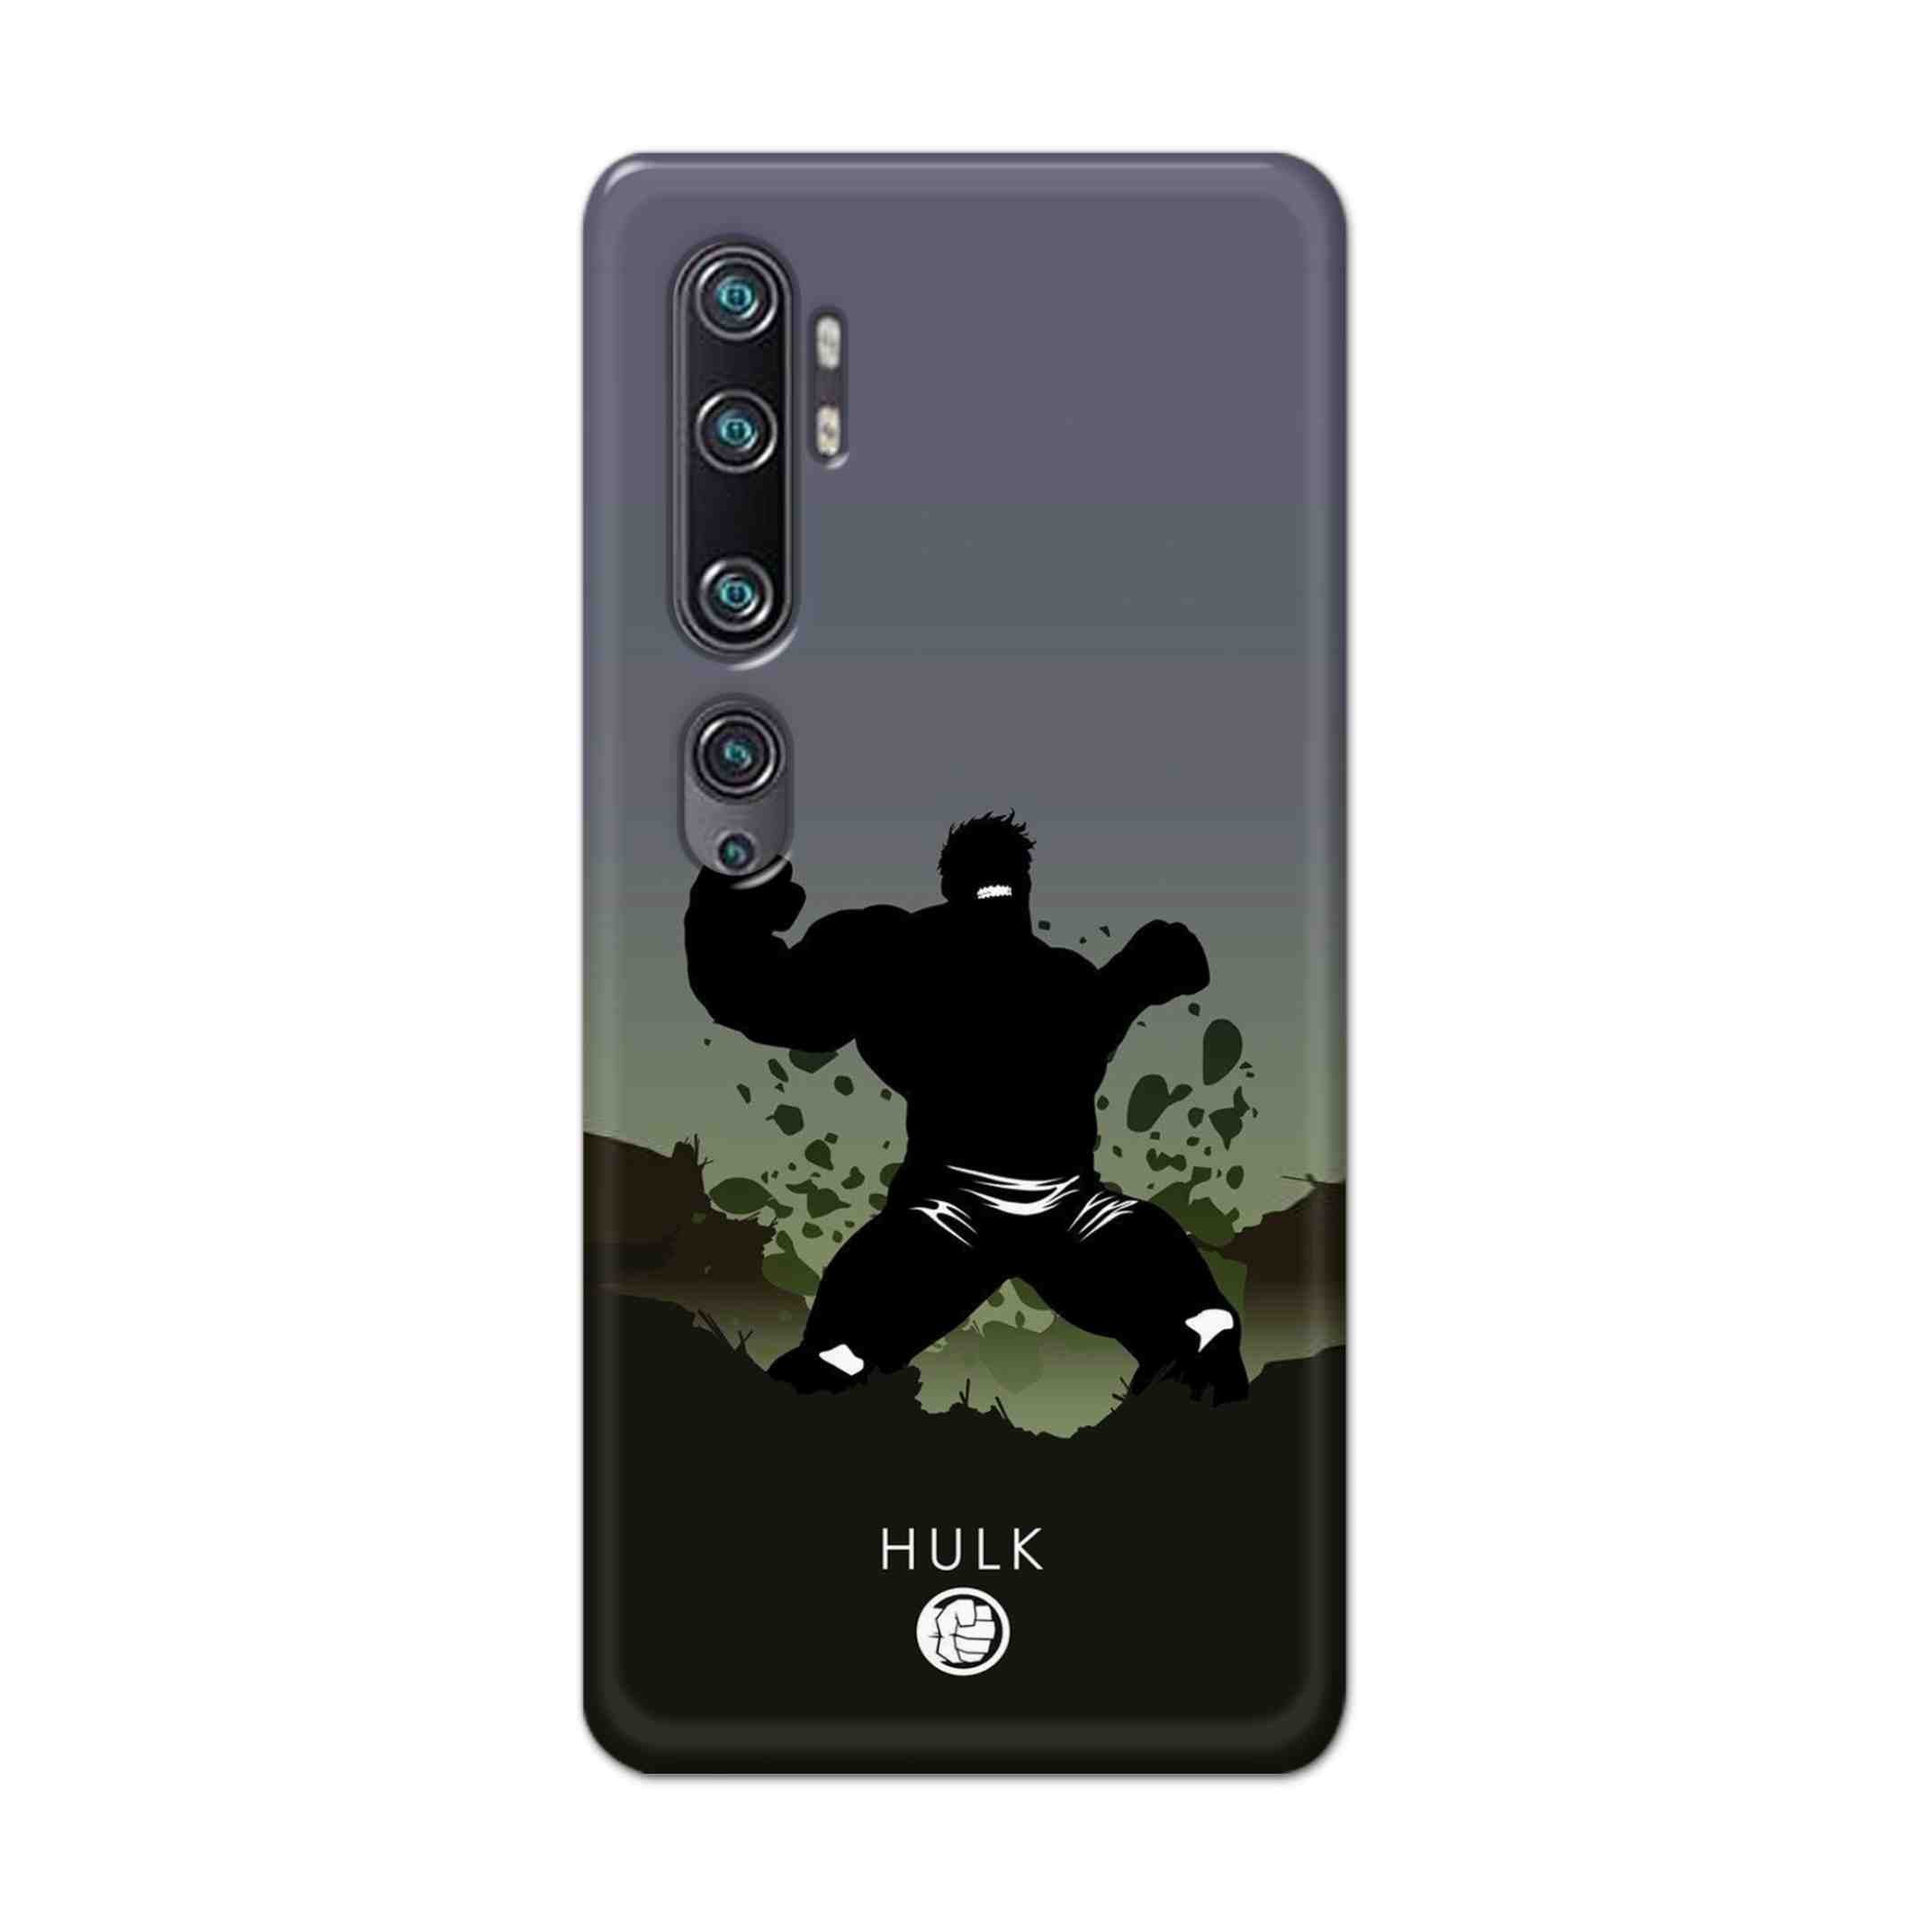 Buy Hulk Drax Hard Back Mobile Phone Case Cover For Xiaomi Mi Note 10 Online